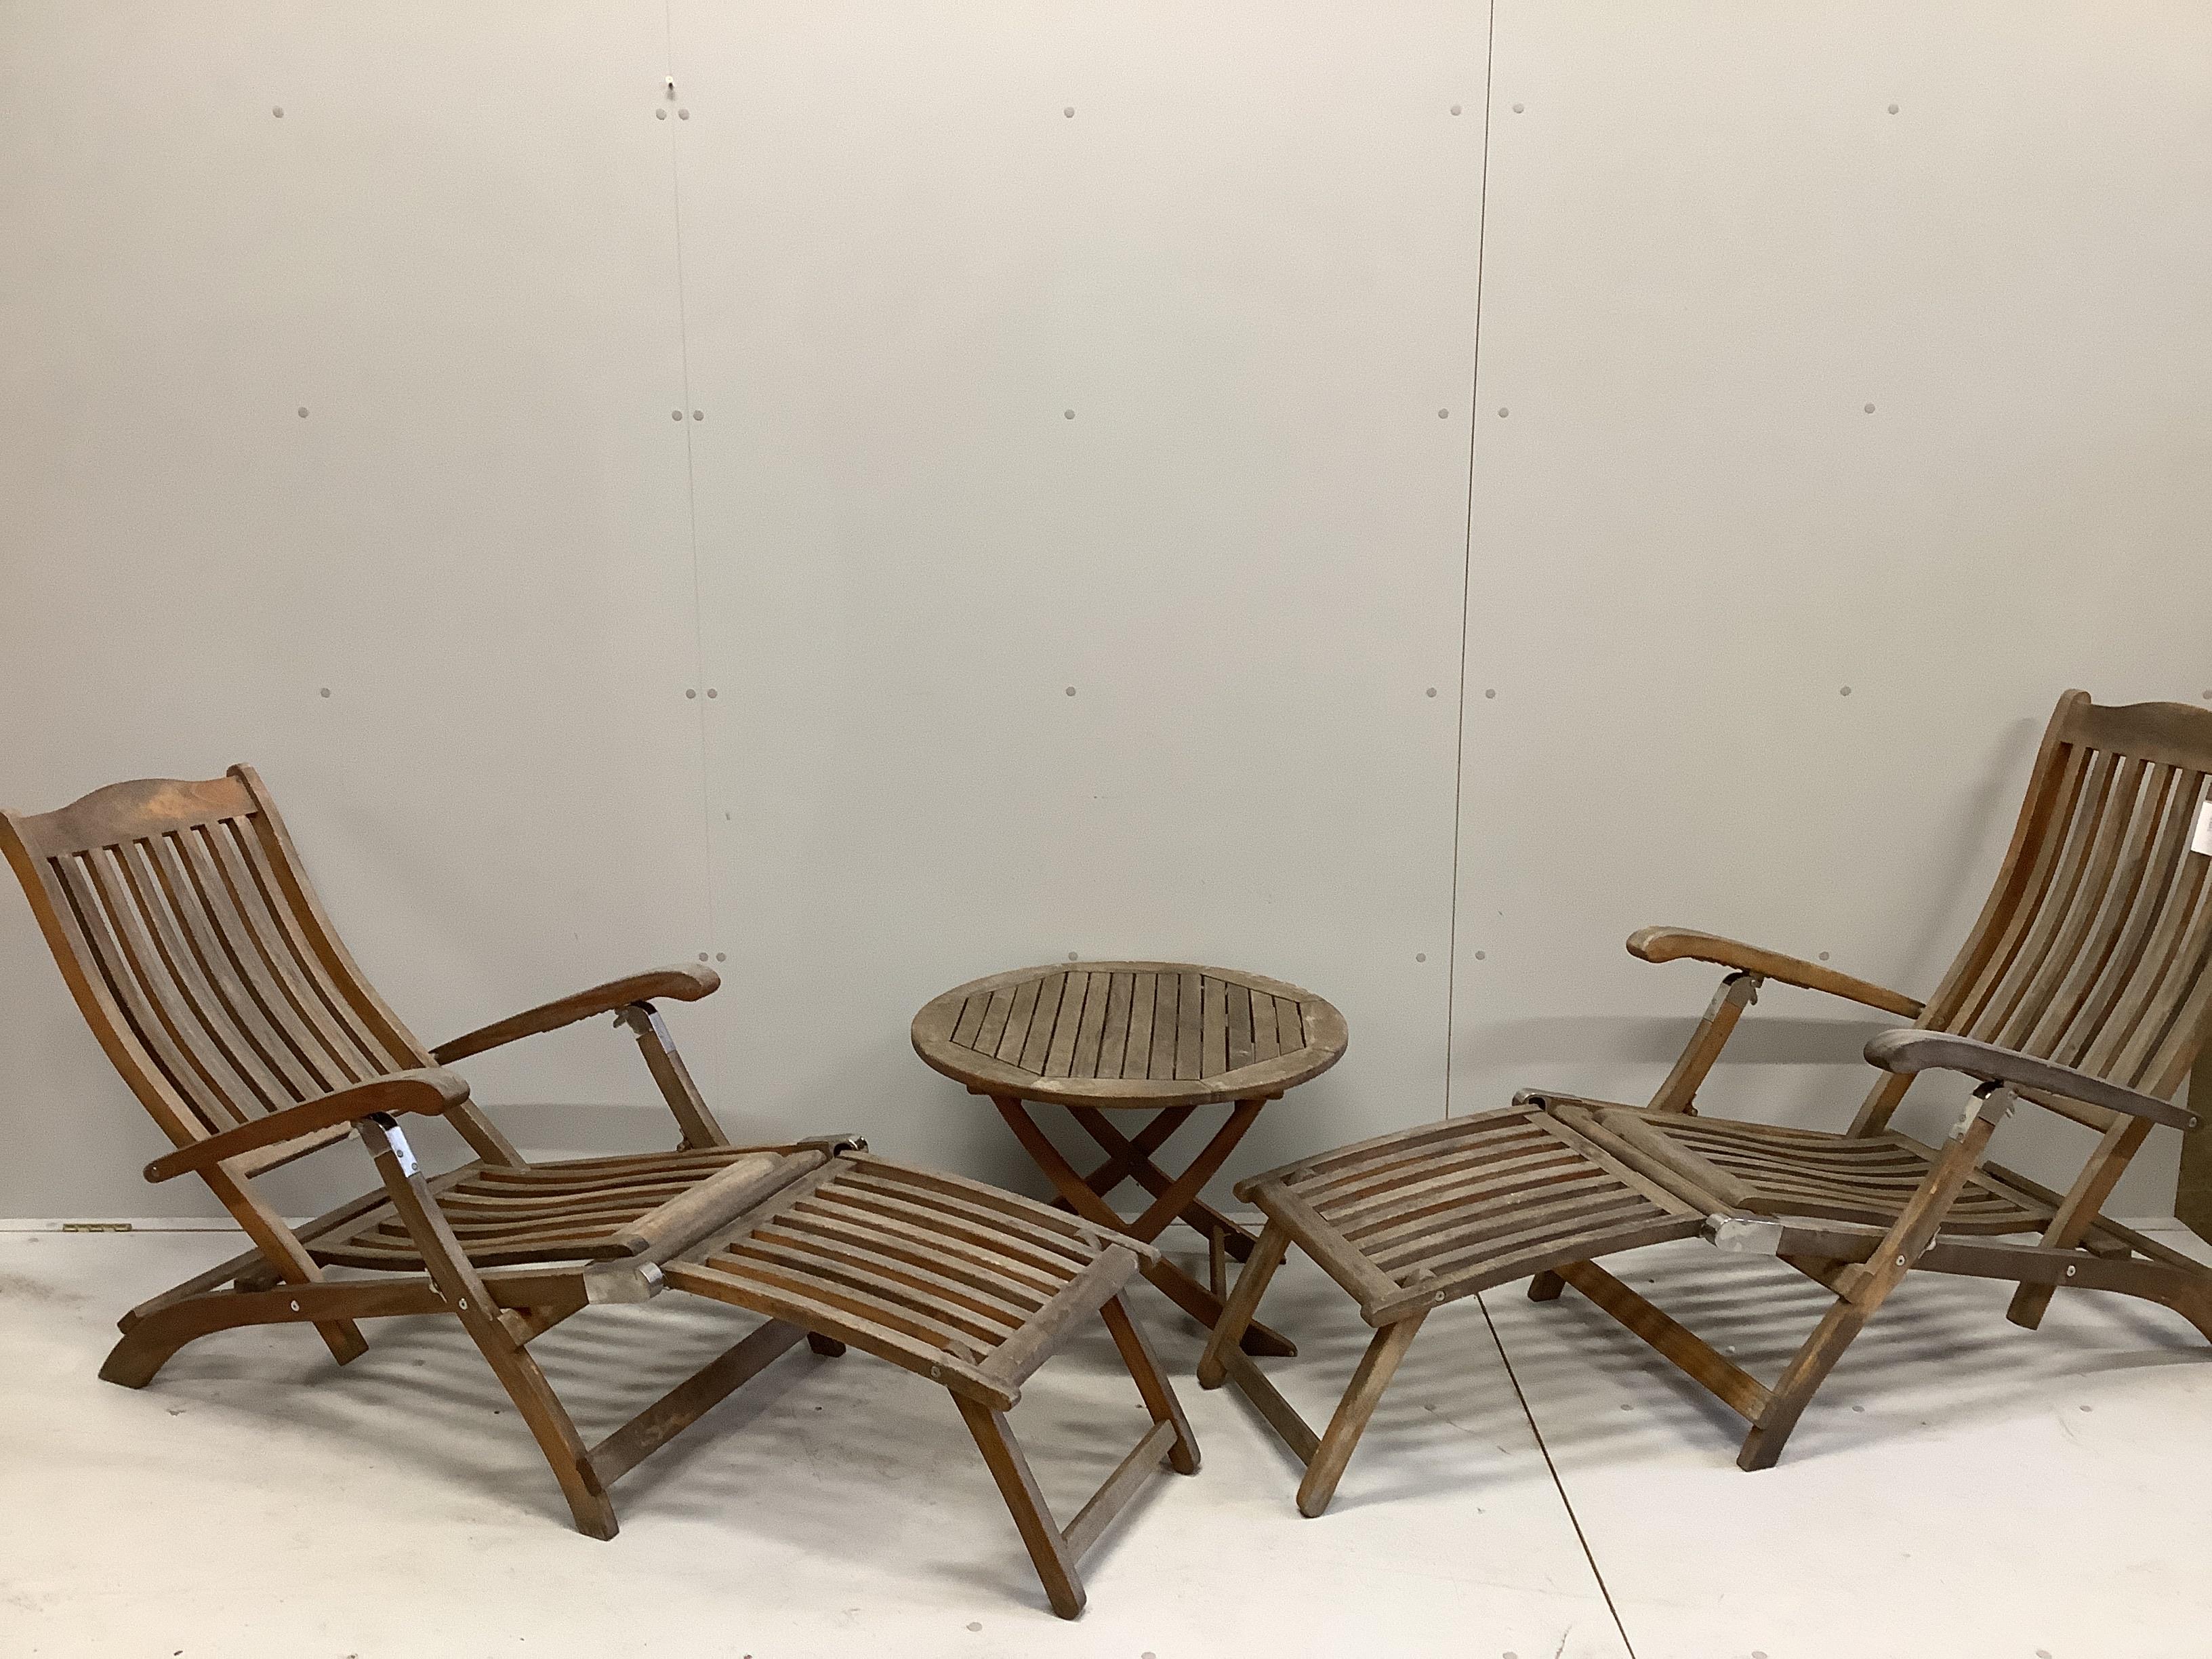 A pair of Alexander Rose weathered teak steamer chairs and a circular teak garden table